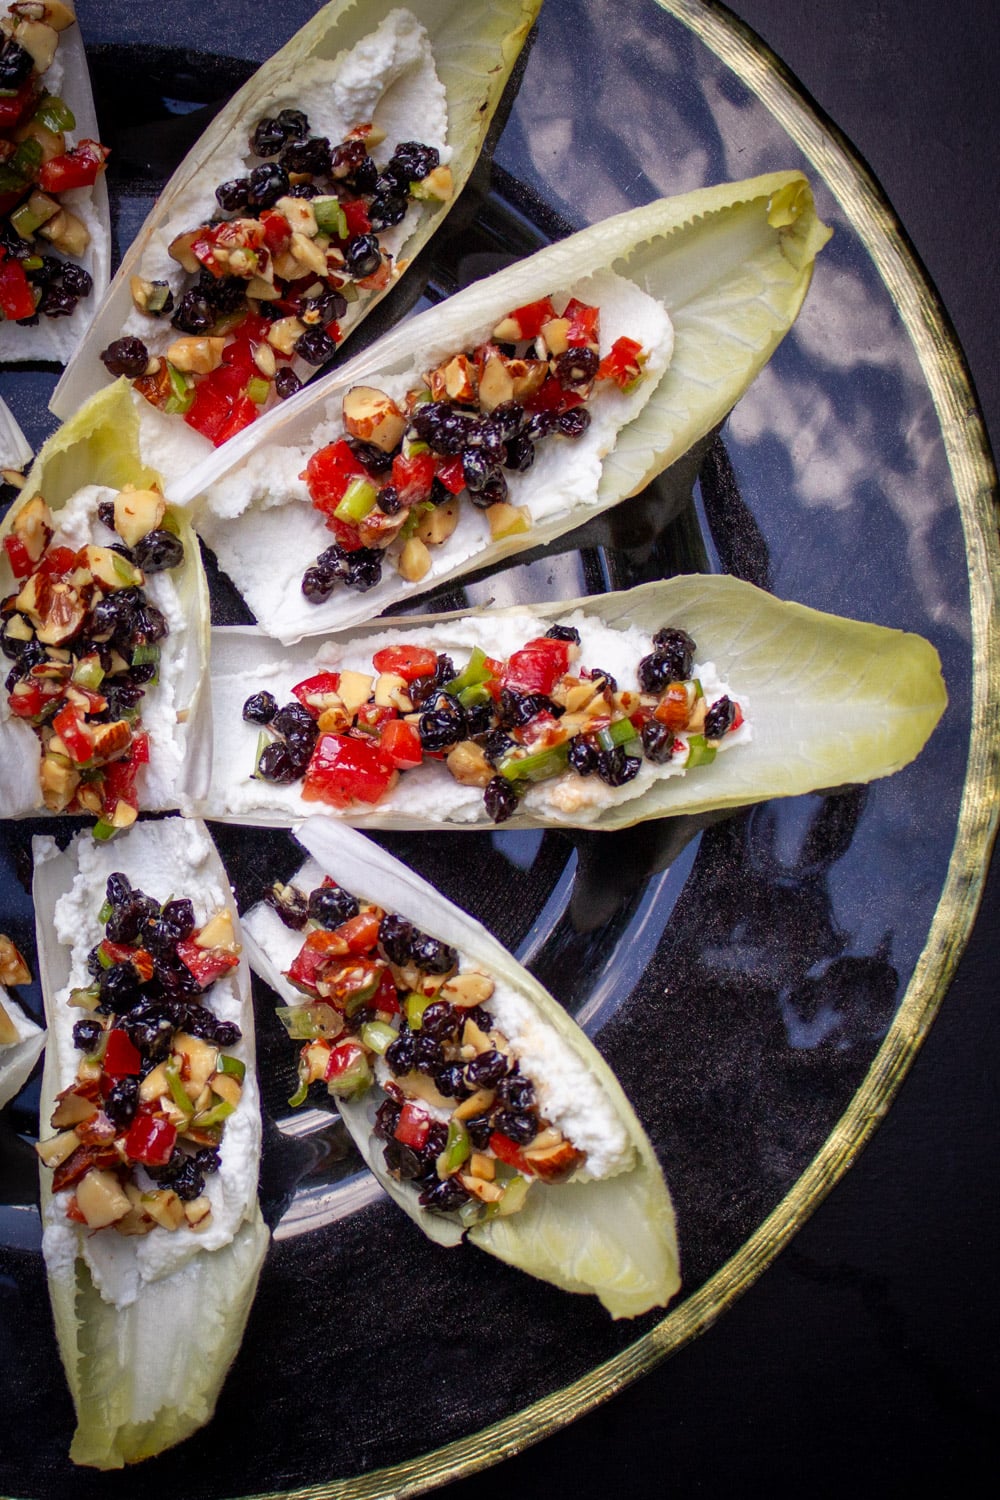 endive appetizers with ricotta, nuts, peppers and cranberries on black plate.